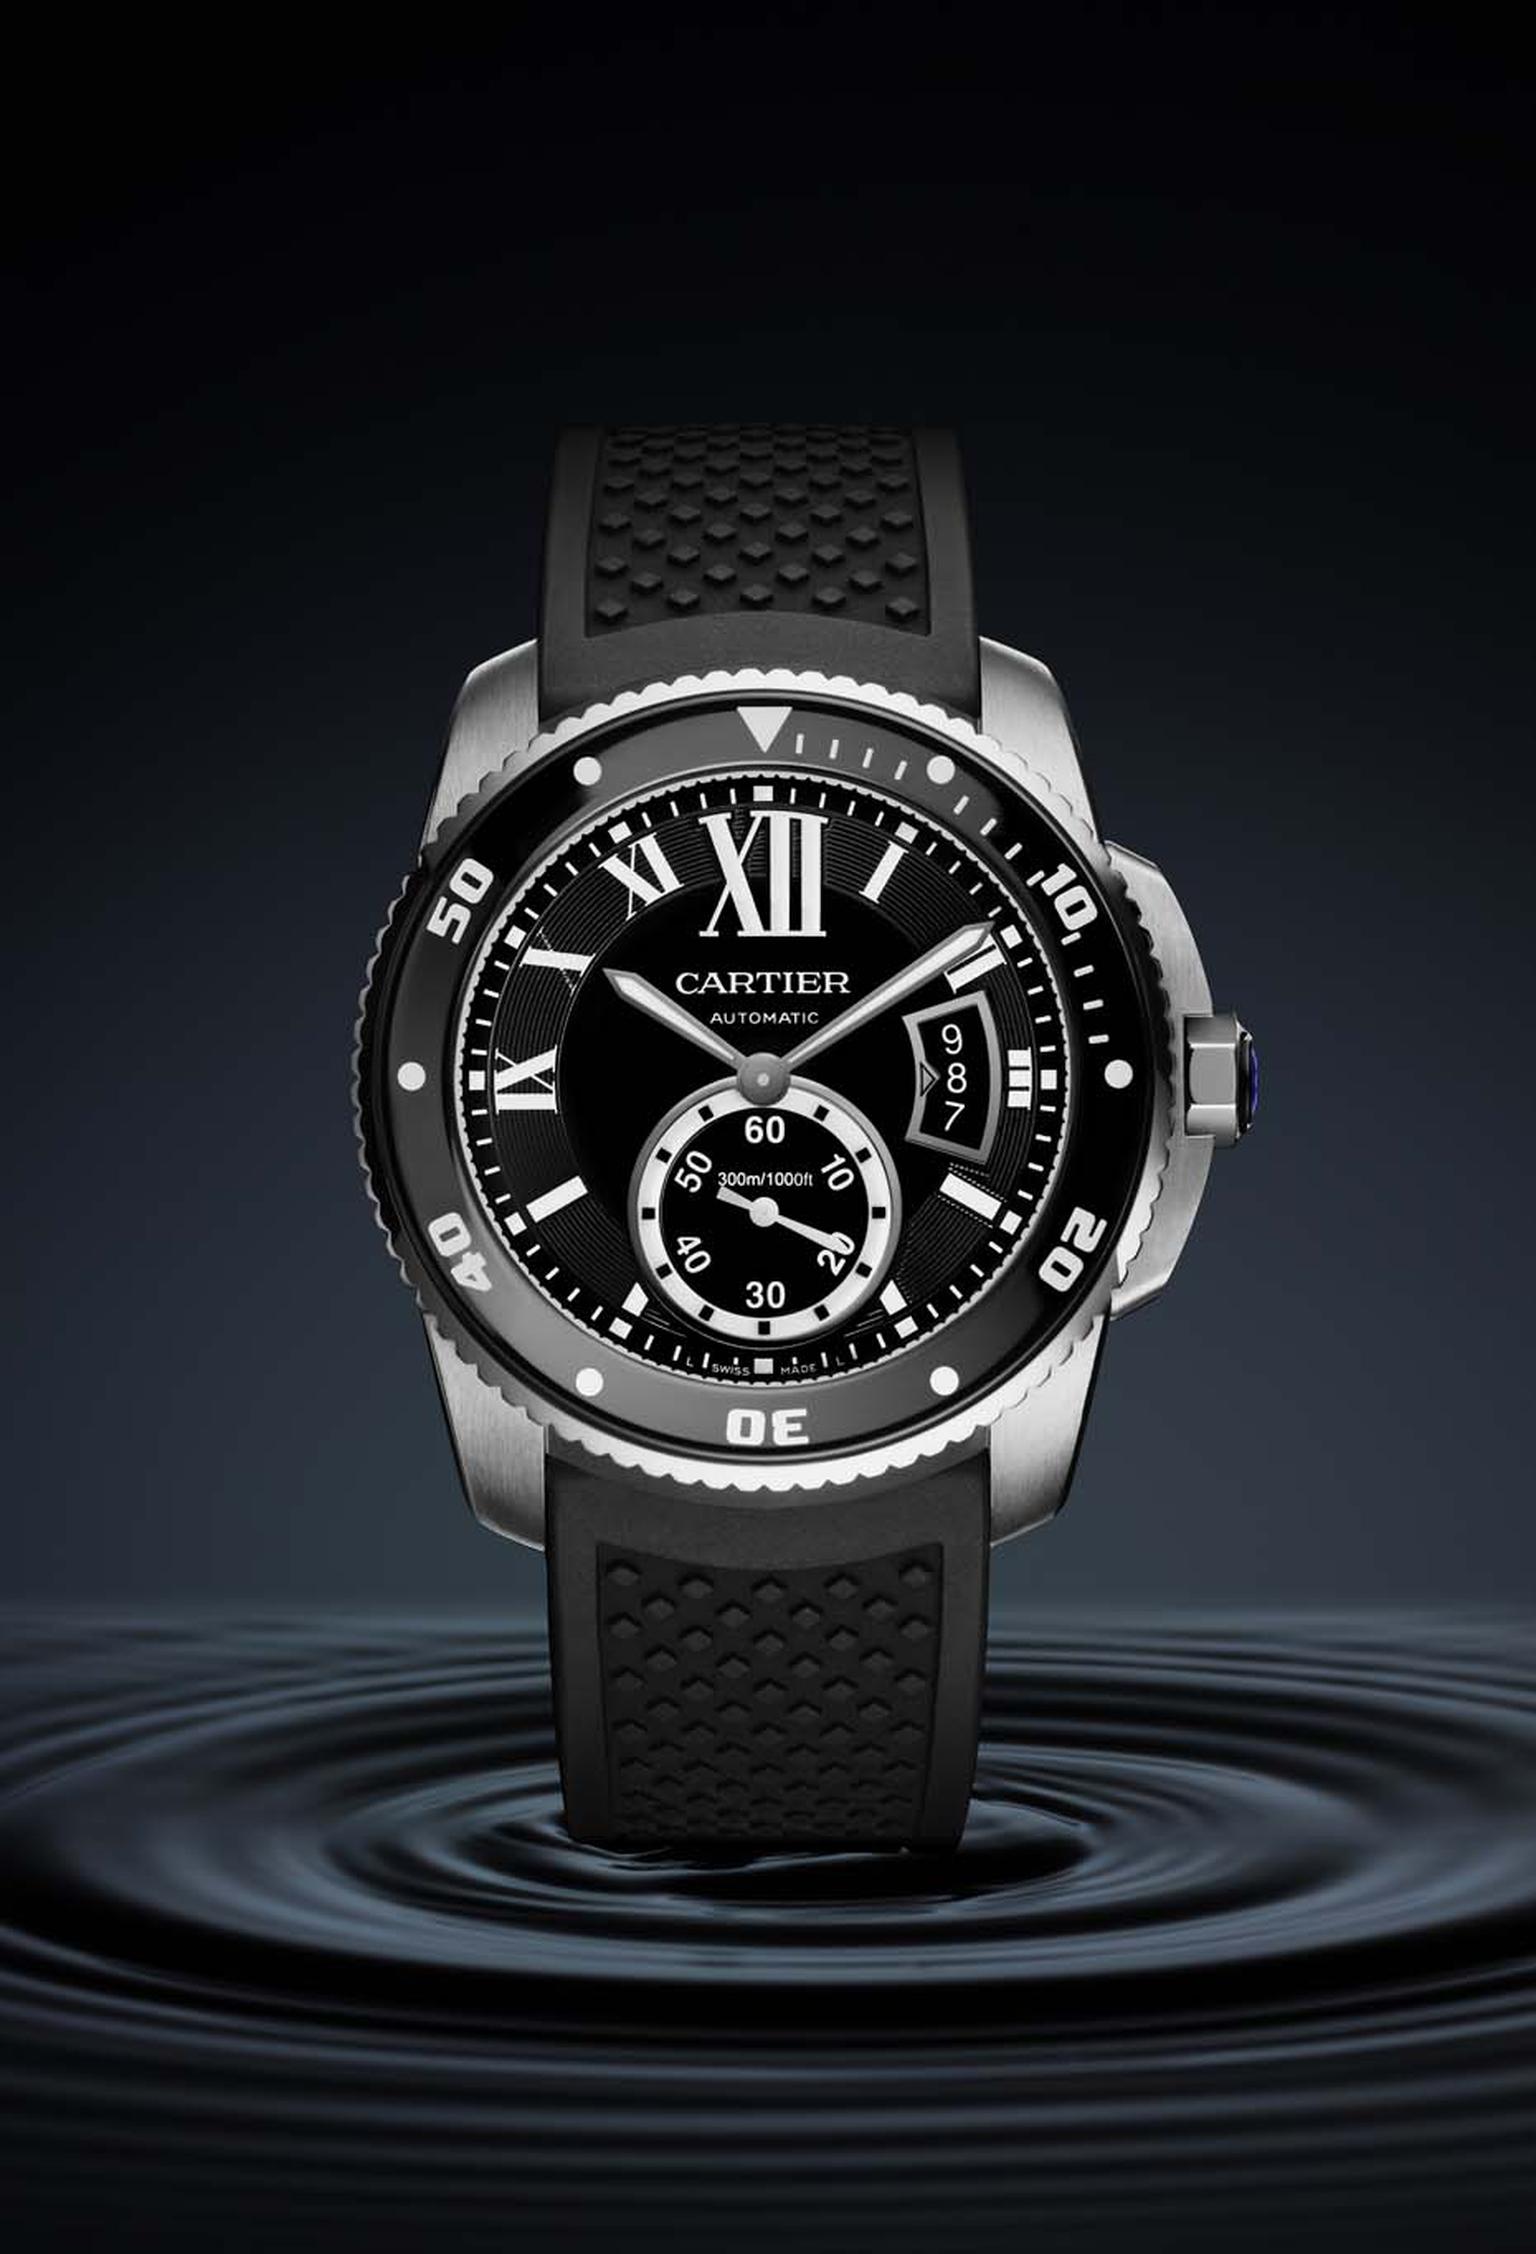 The new Calibre de Cartier Diver in steel features a unidirectional bezel and is water resistant to 300m.